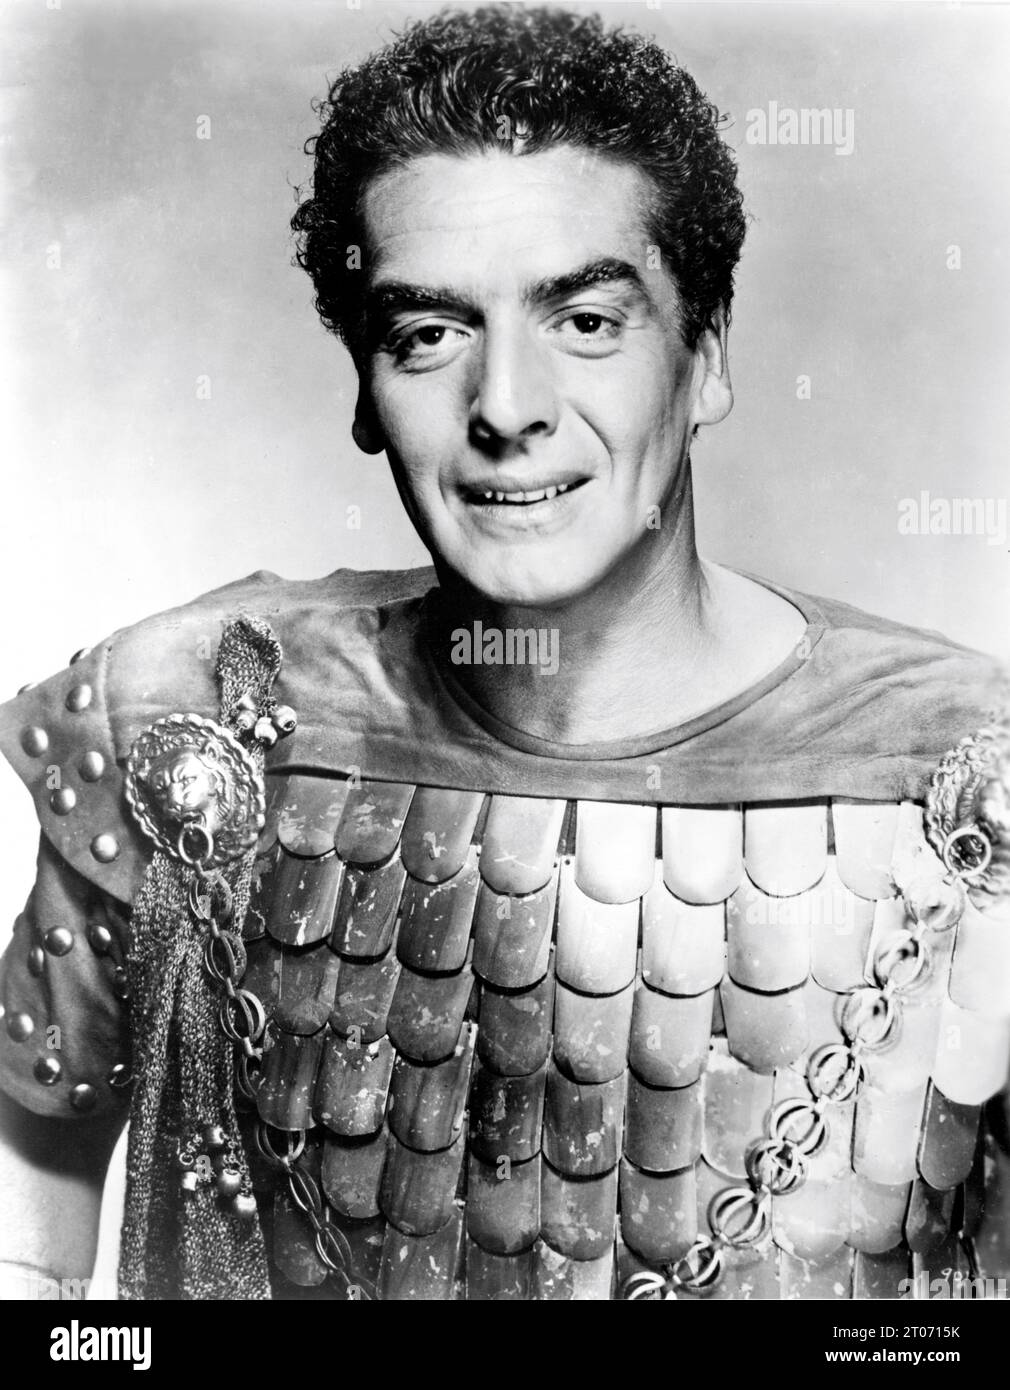 VICTOR MATURE portrait as Demetrius in DEMETRIUS AND THE GLADIATORS 1954 director DELMER DAVES based on a character created by Lloyd C. Douglas in The Robe written by Philip Dunne music Franz Waxman producer Frank Ross Twentieth Century Fox Stock Photo